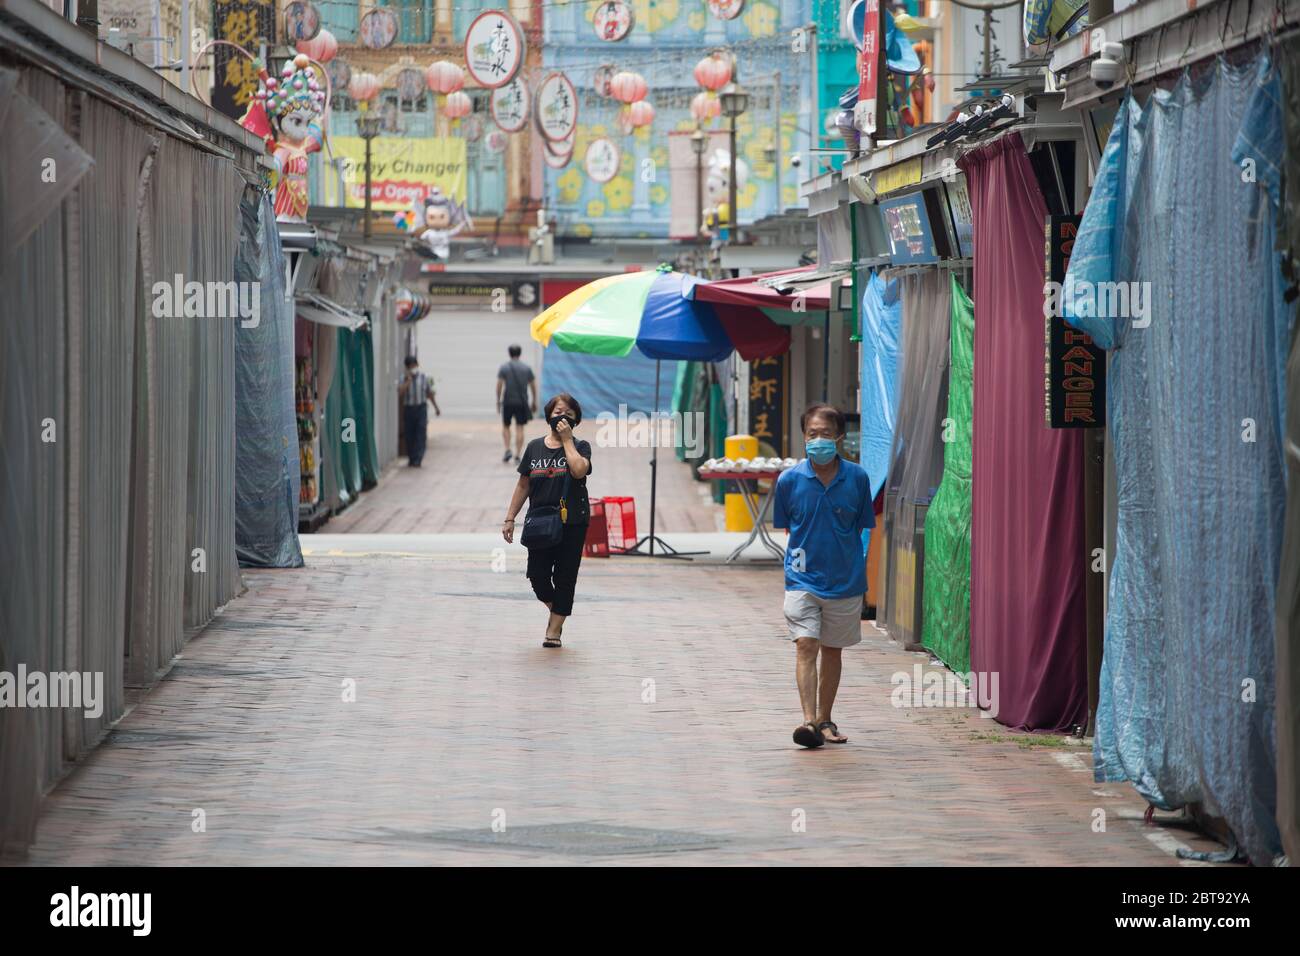 During the pandemic situation. Few folks wearing a mask roamed on the pale street at Chinatown, Singapore Stock Photo